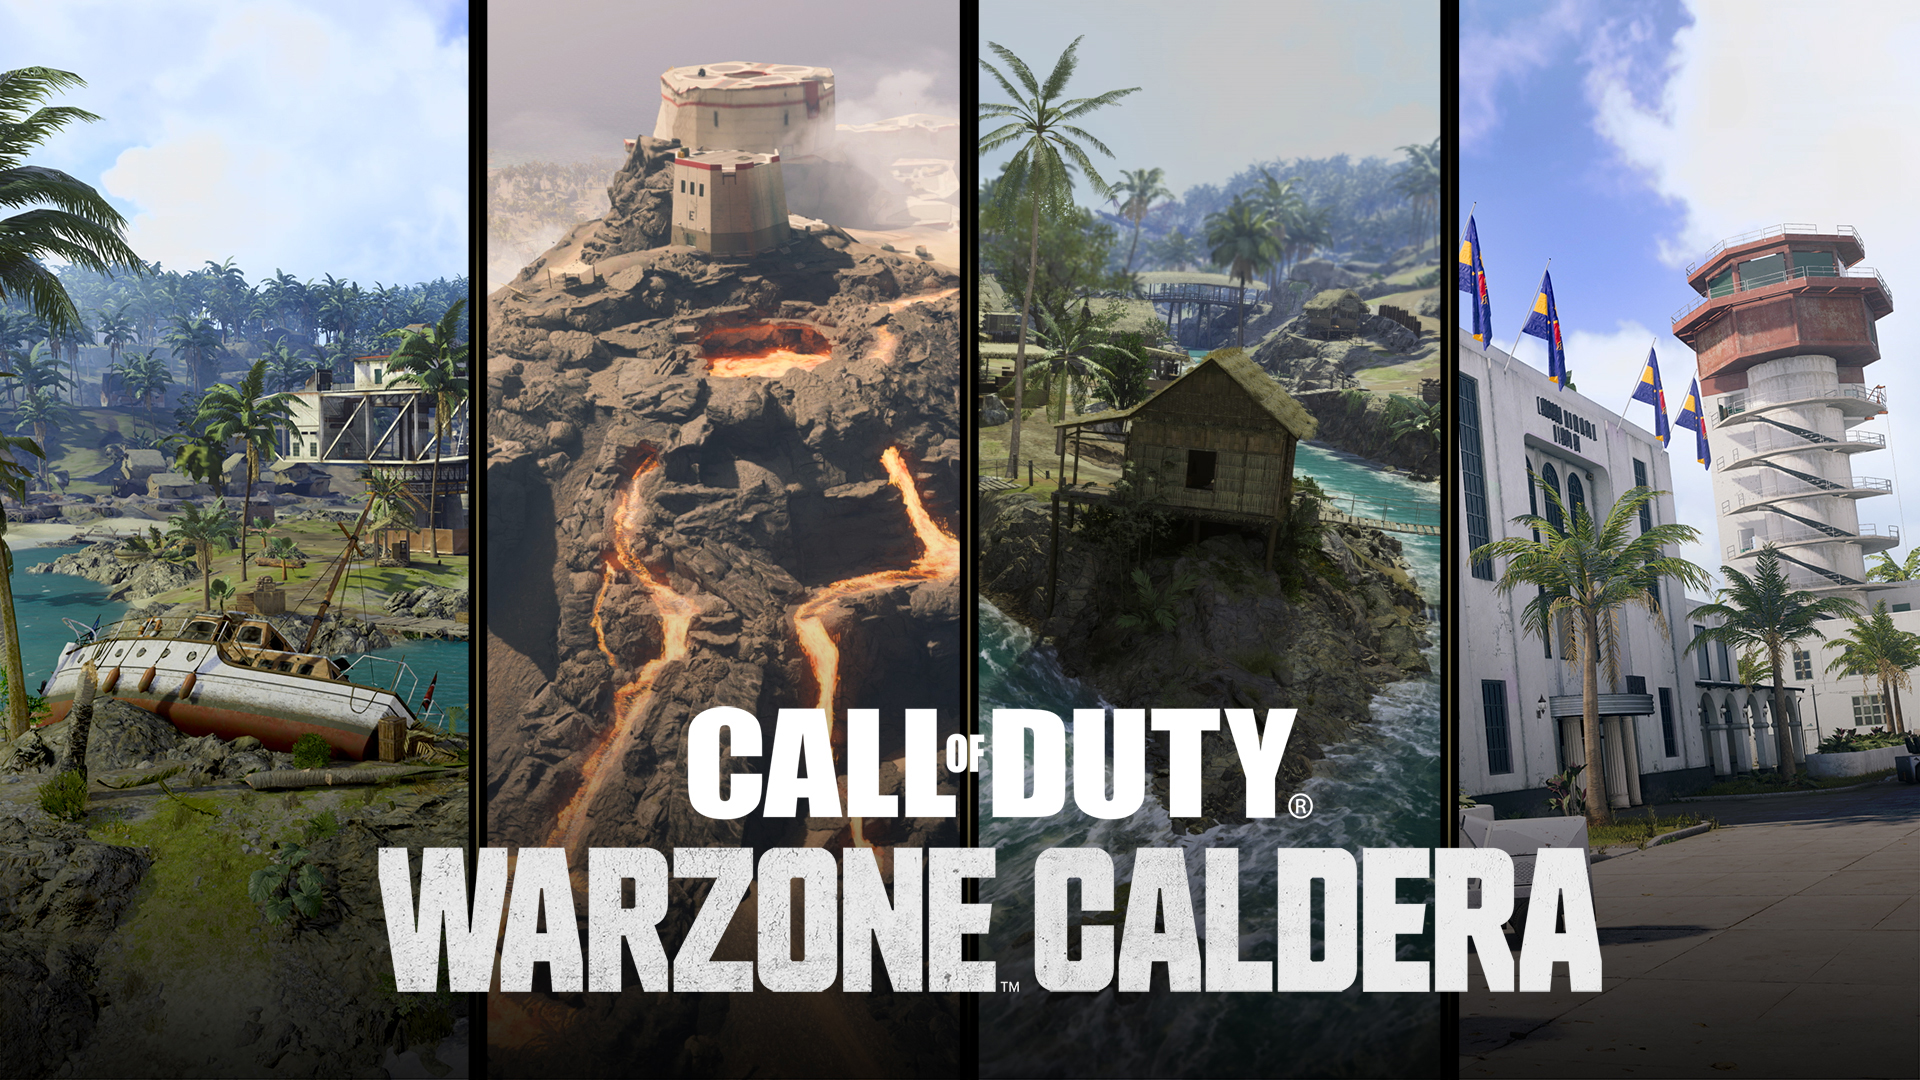 The original Warzone has relaunched as the stripped back Warzone